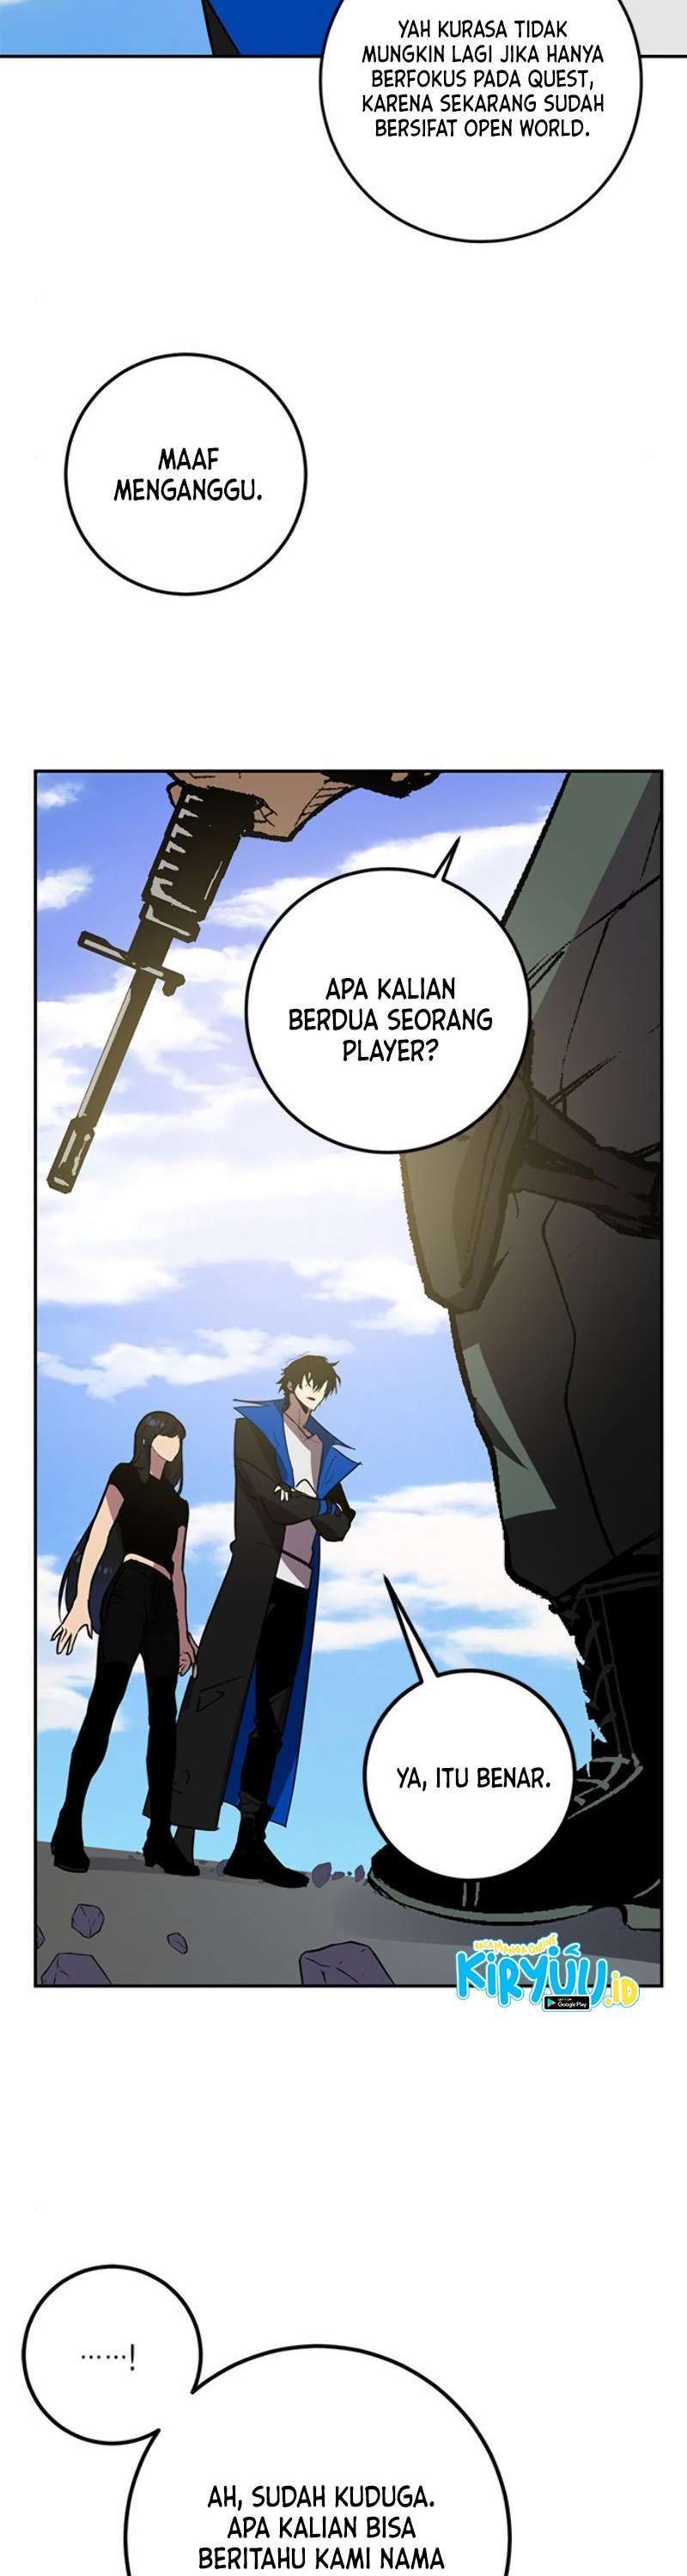 Return to Player Chapter 40